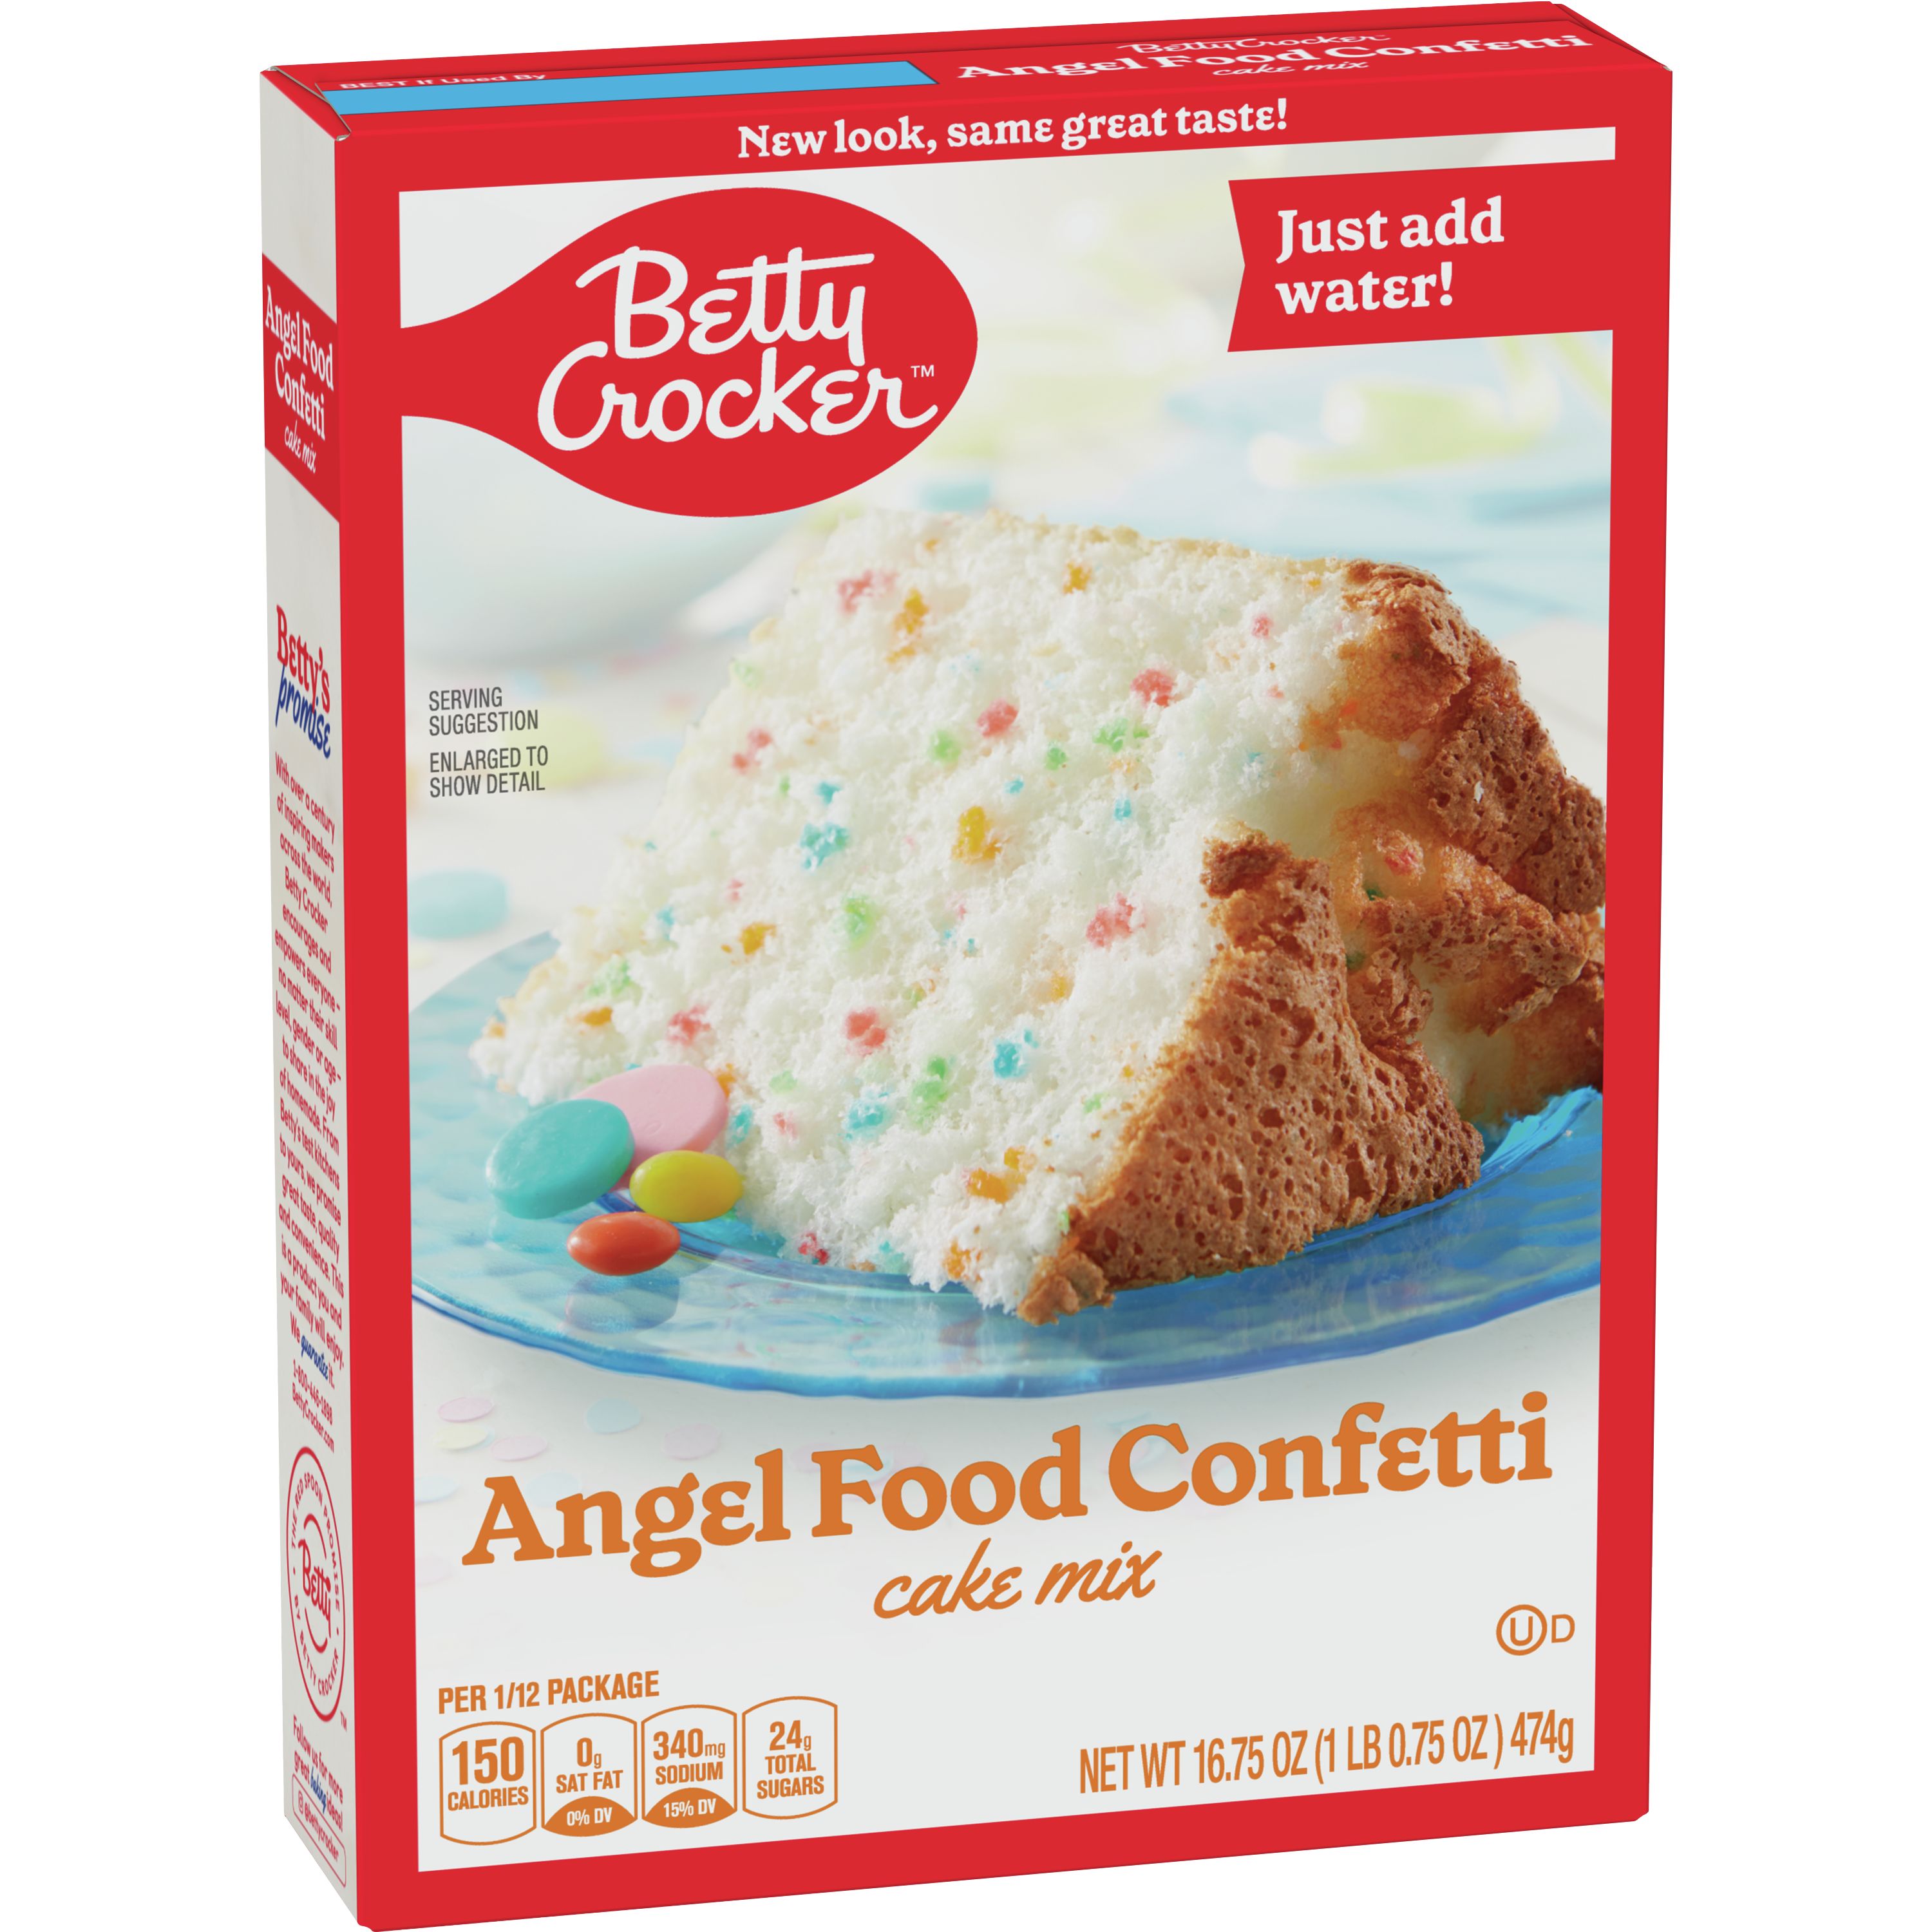 National Angel Food Cake Day - October 10 - YouTube